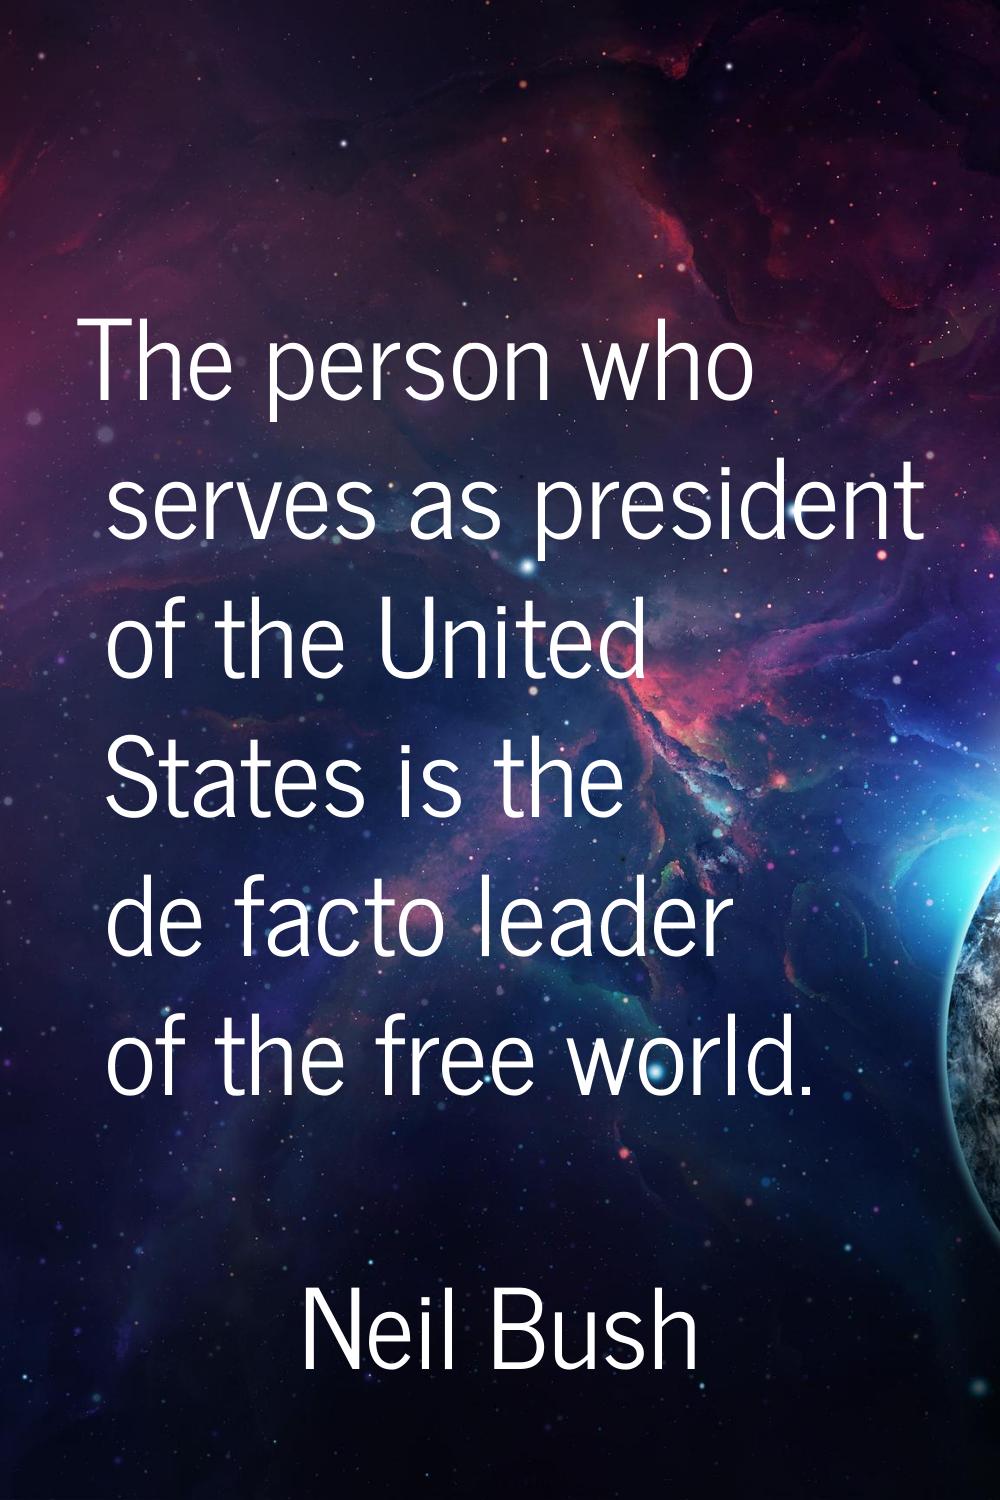 The person who serves as president of the United States is the de facto leader of the free world.